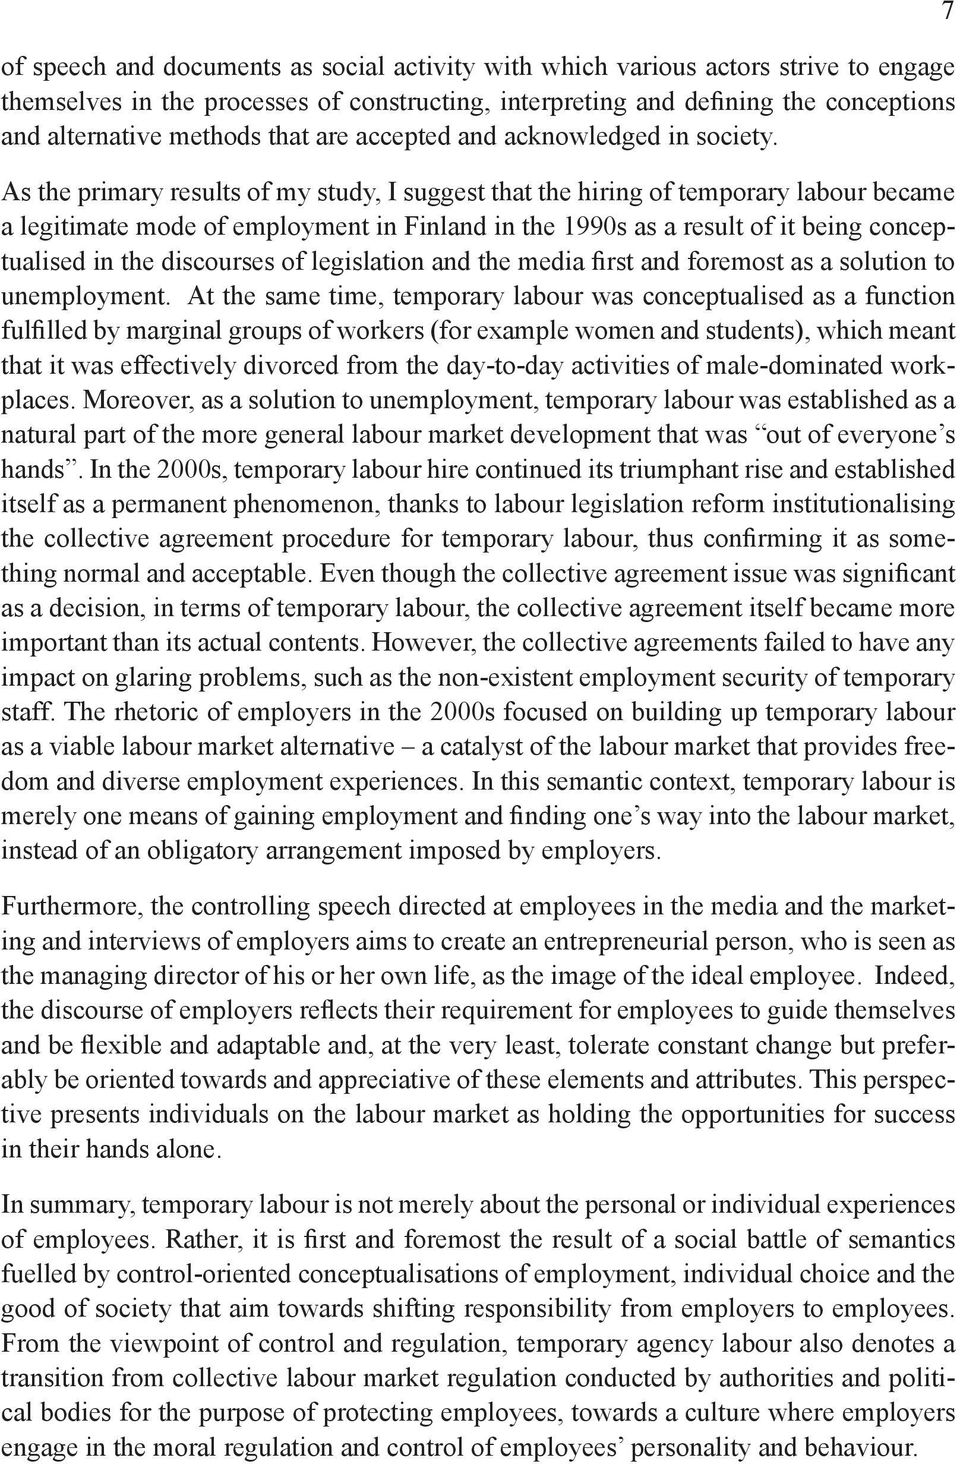 As the primary results of my study, I suggest that the hiring of temporary labour became a legitimate mode of employment in Finland in the 1990s as a result of it being conceptualised in the